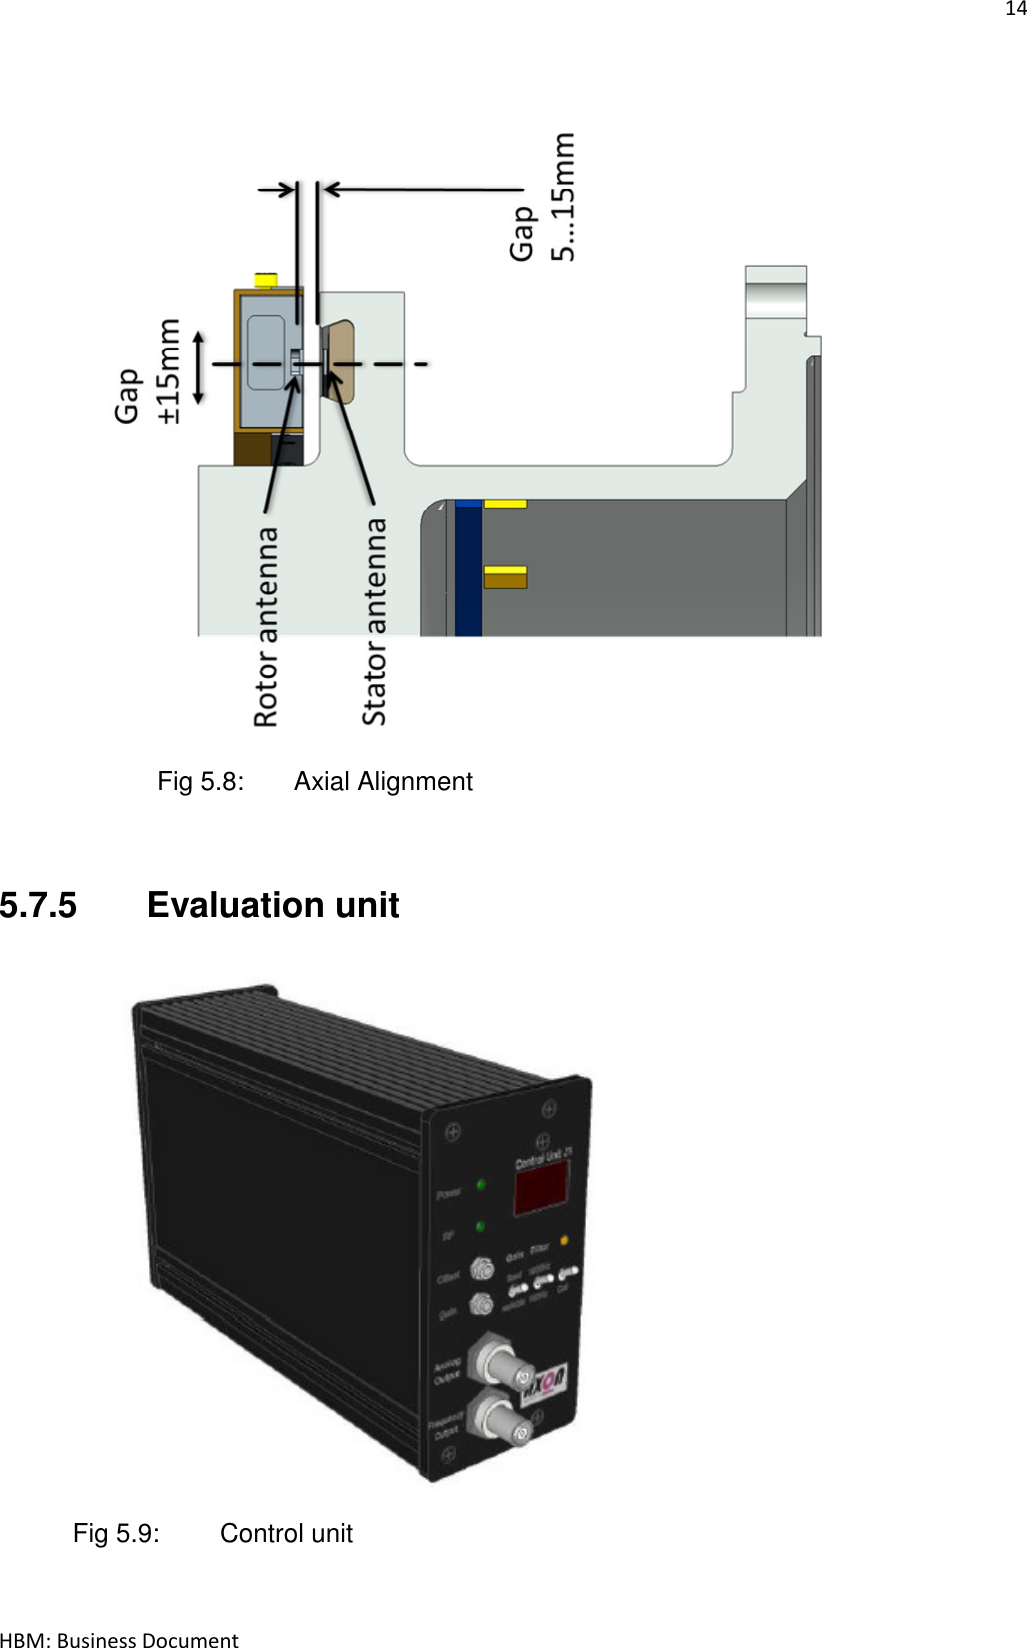 14  HBM: Business Document                        Fig 5.8:   Axial Alignment   5.7.5  Evaluation unit           Fig 5.9:   Control unit    